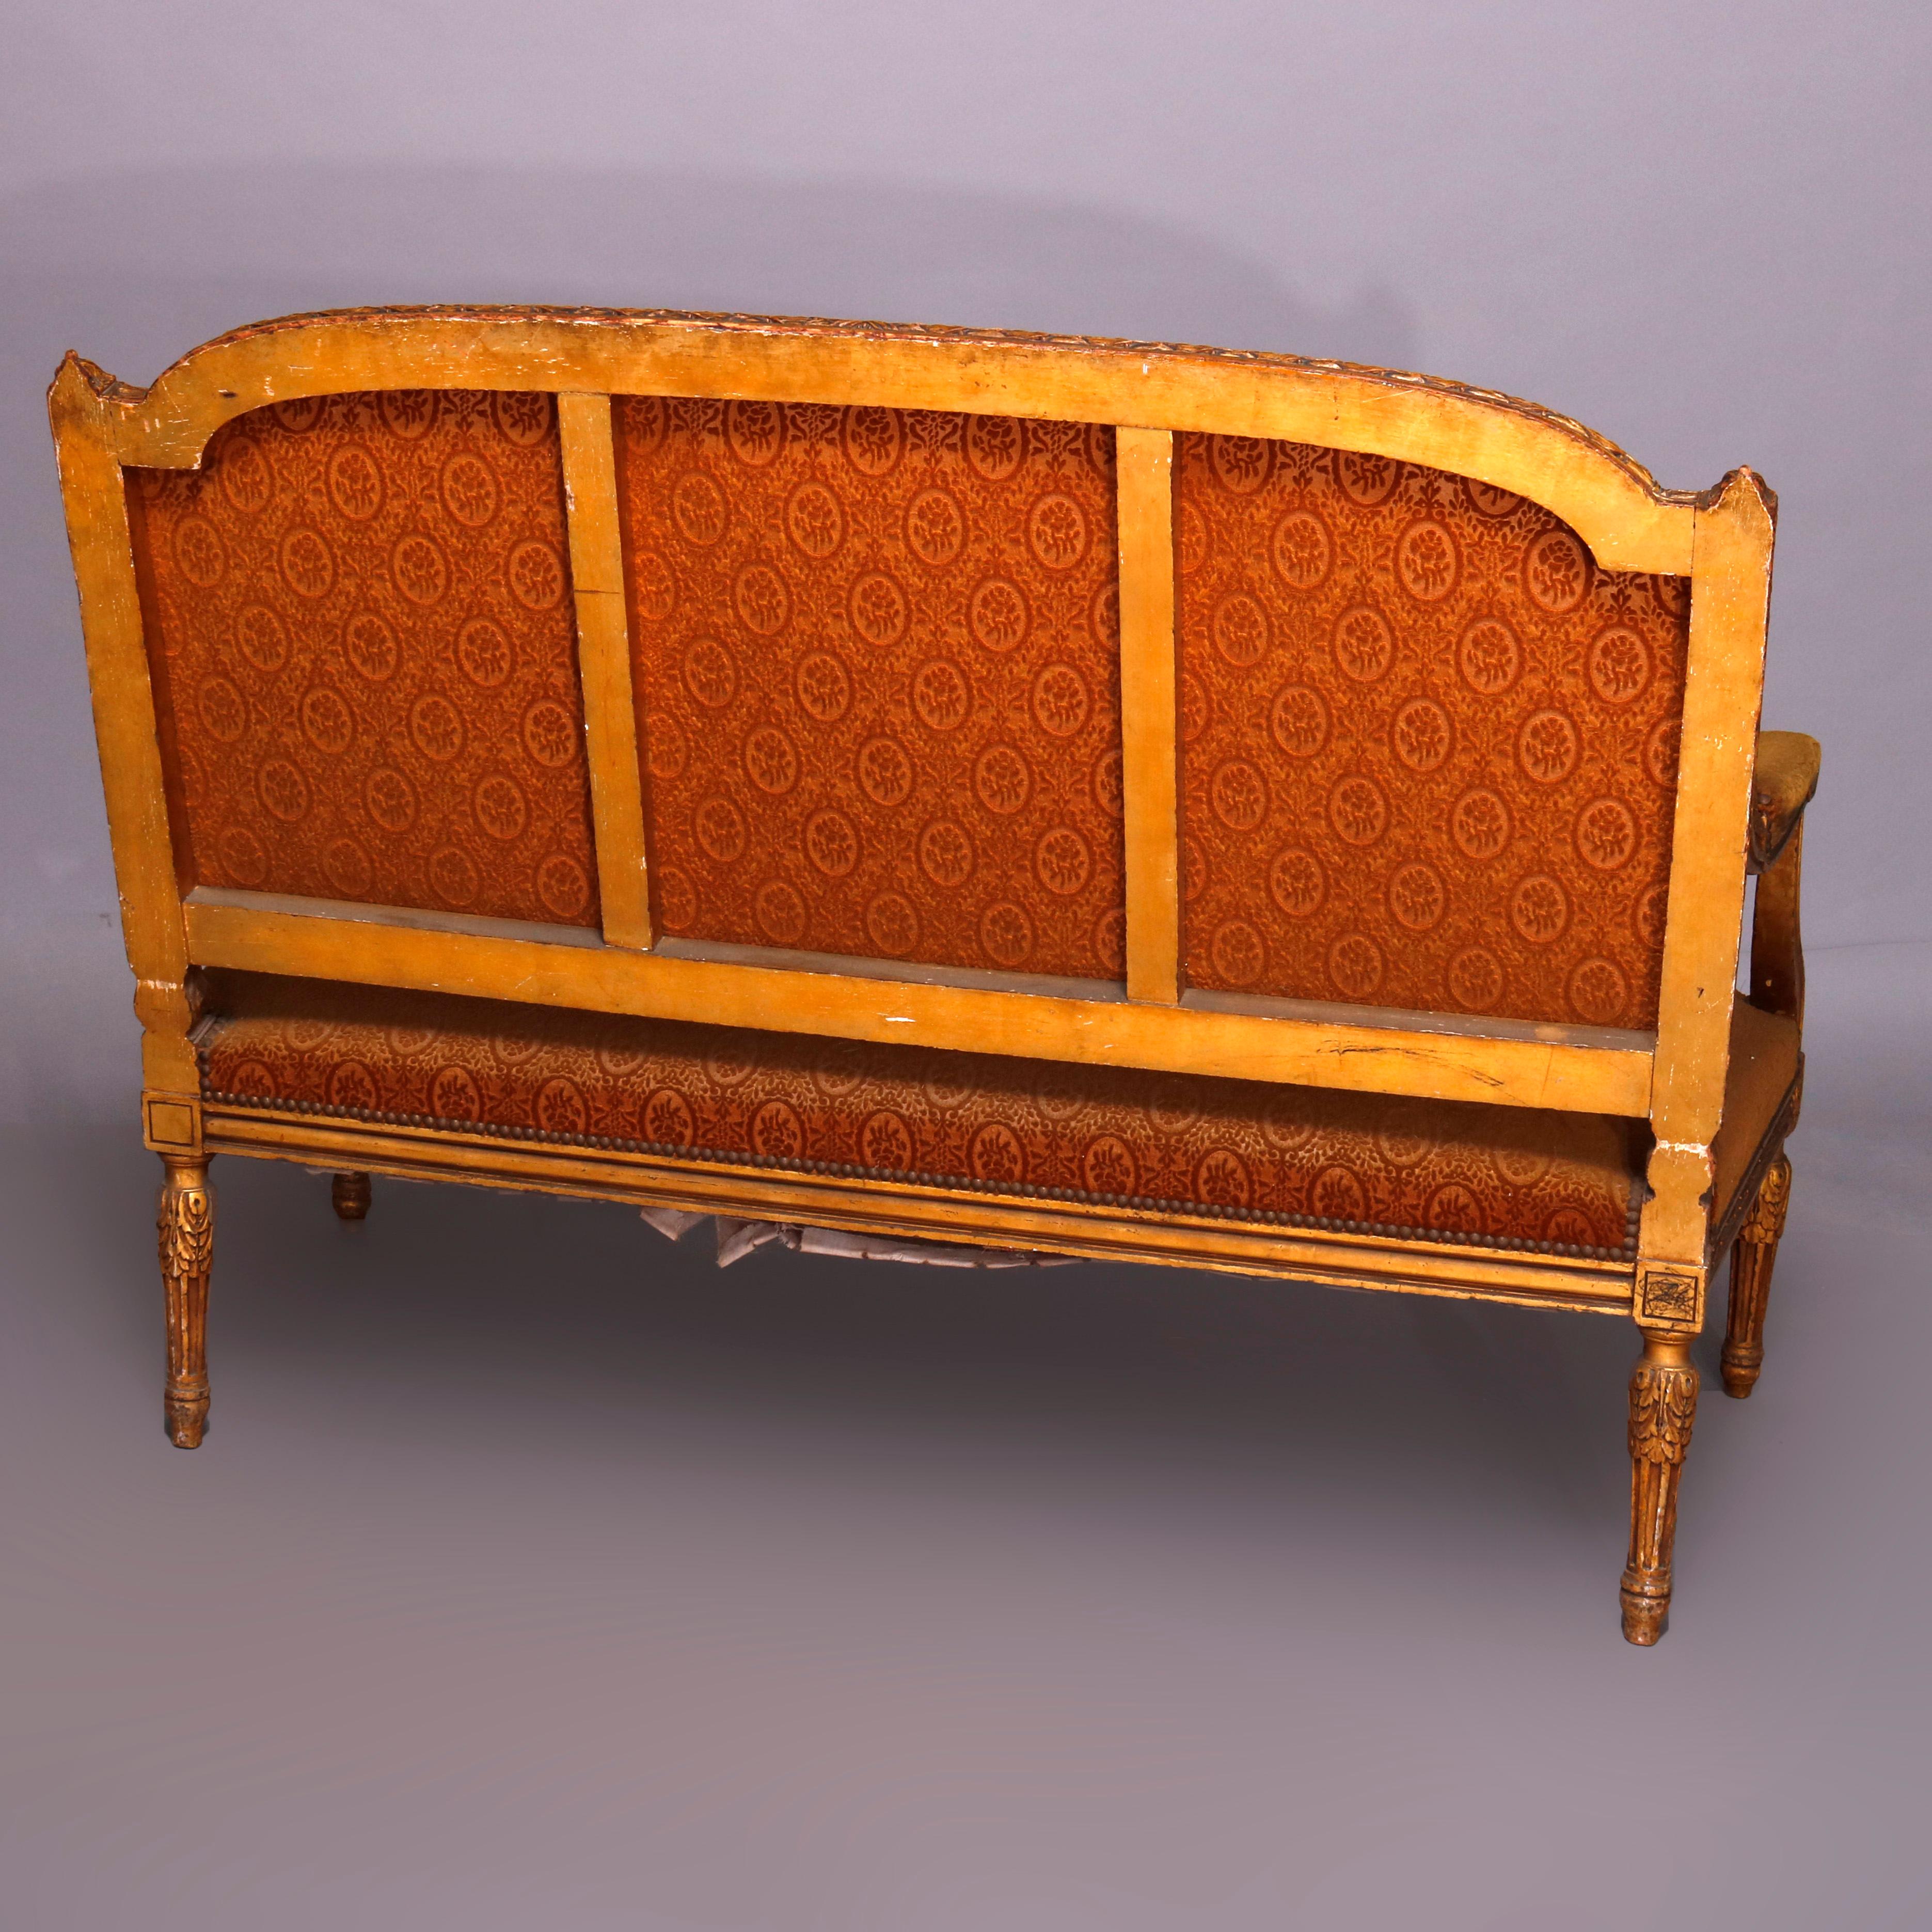 An antique French Louis XVI style settee offers carved giltwood frame with foliate bordering and rosettes, having upholstered back, seat and arms, raised on carved acanthus fluted legs, circa 1890

***DELIVERY NOTICE – Due to COVID-19 we have